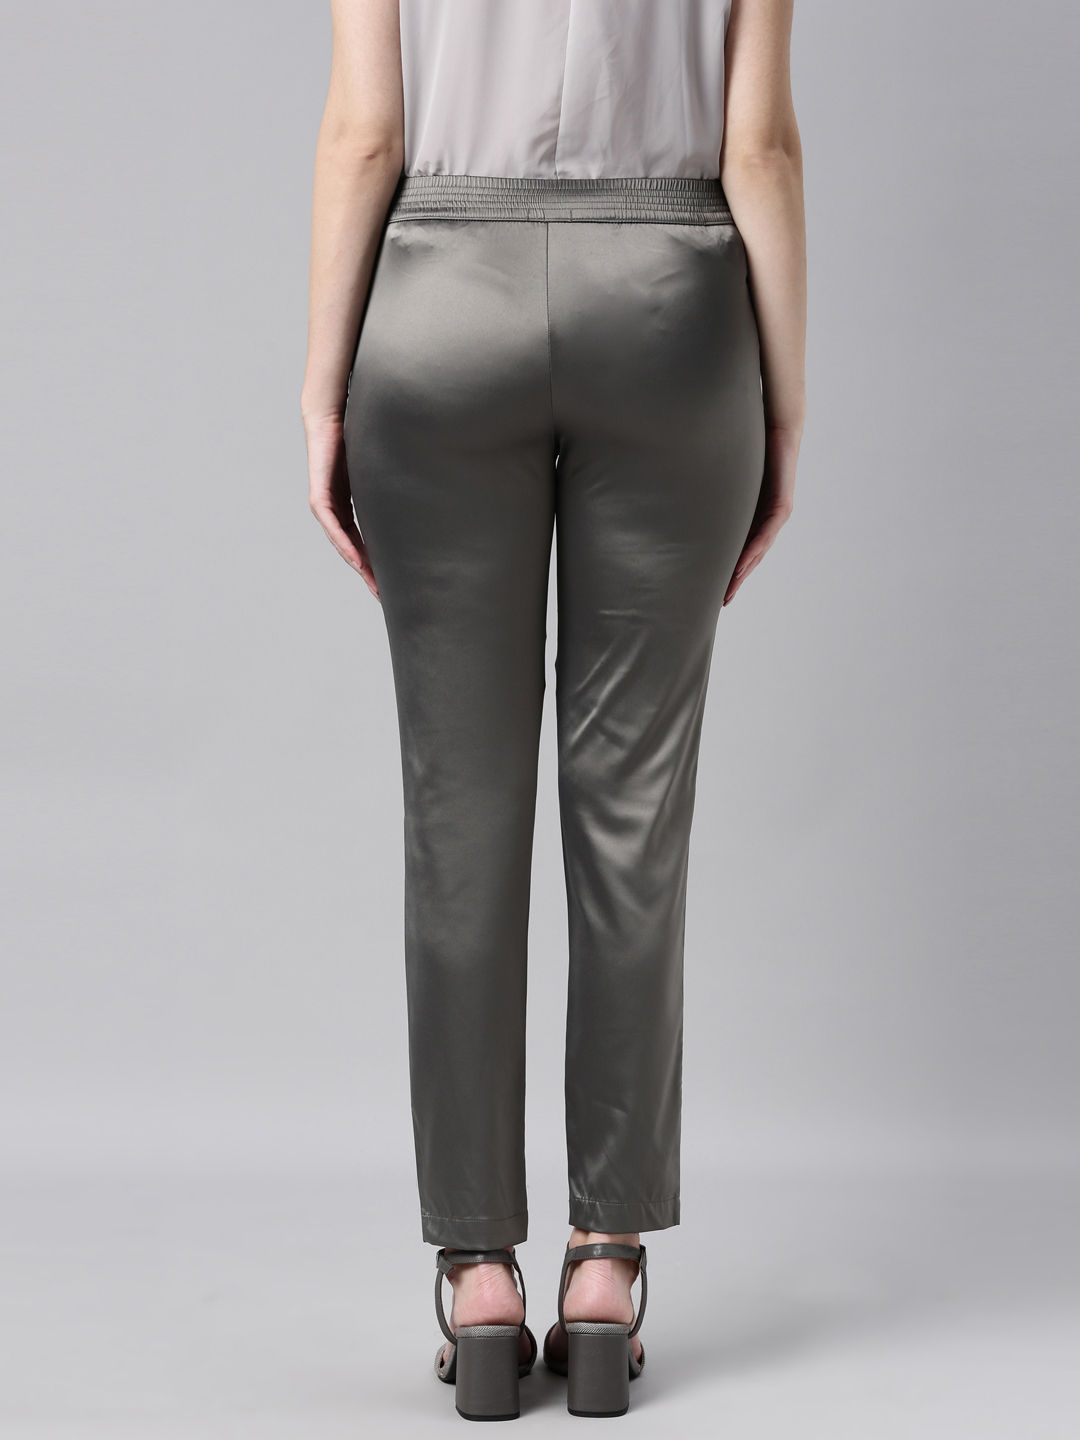 Silver trousers hot tend alert 9 best silver trousers youve seen all over  Instagram  HELLO